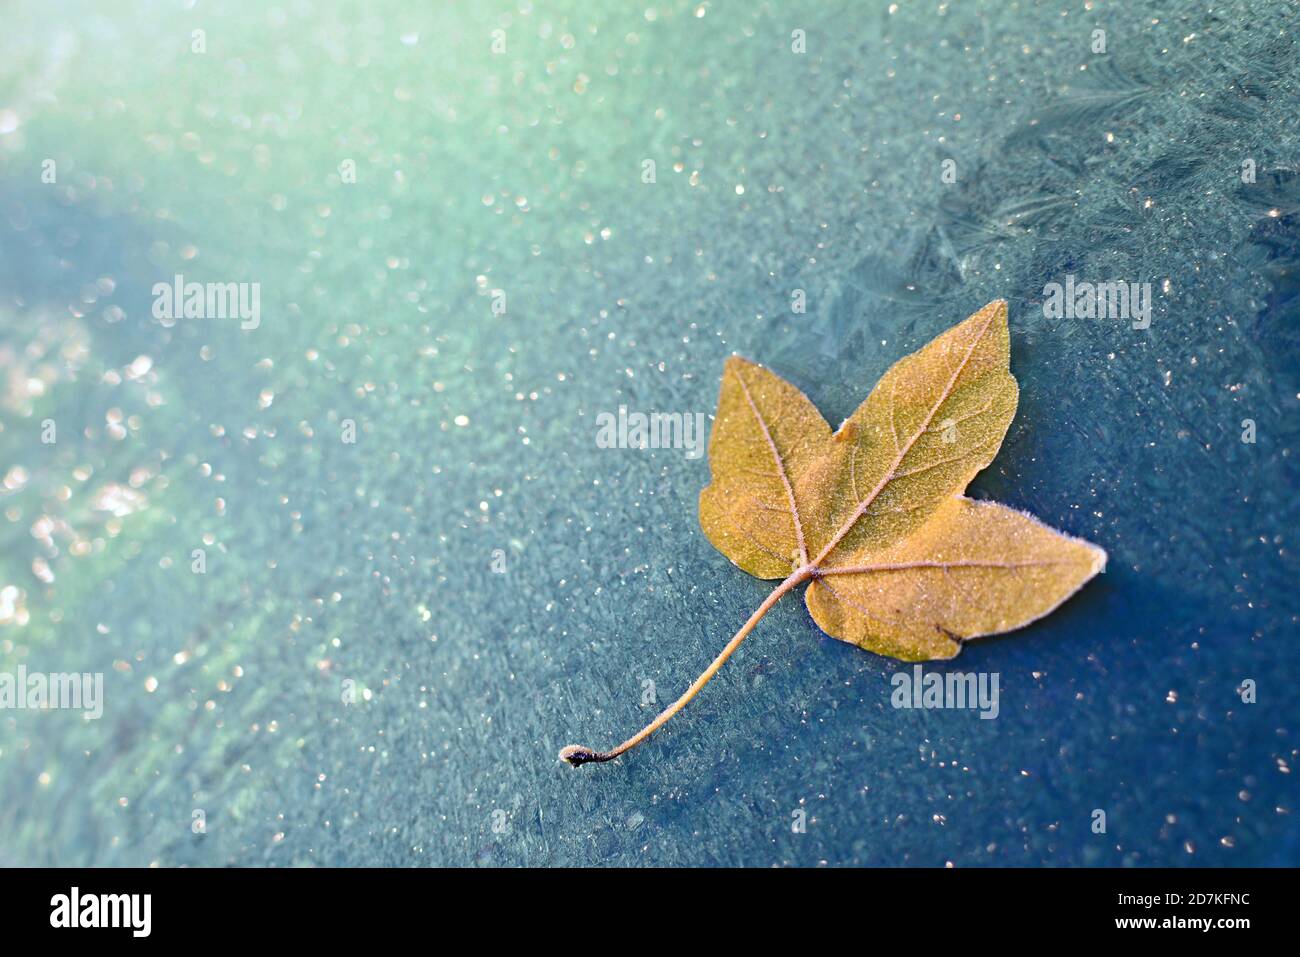 Maple leaf on ice surface. Leaf with ice crystals. Stock Photo